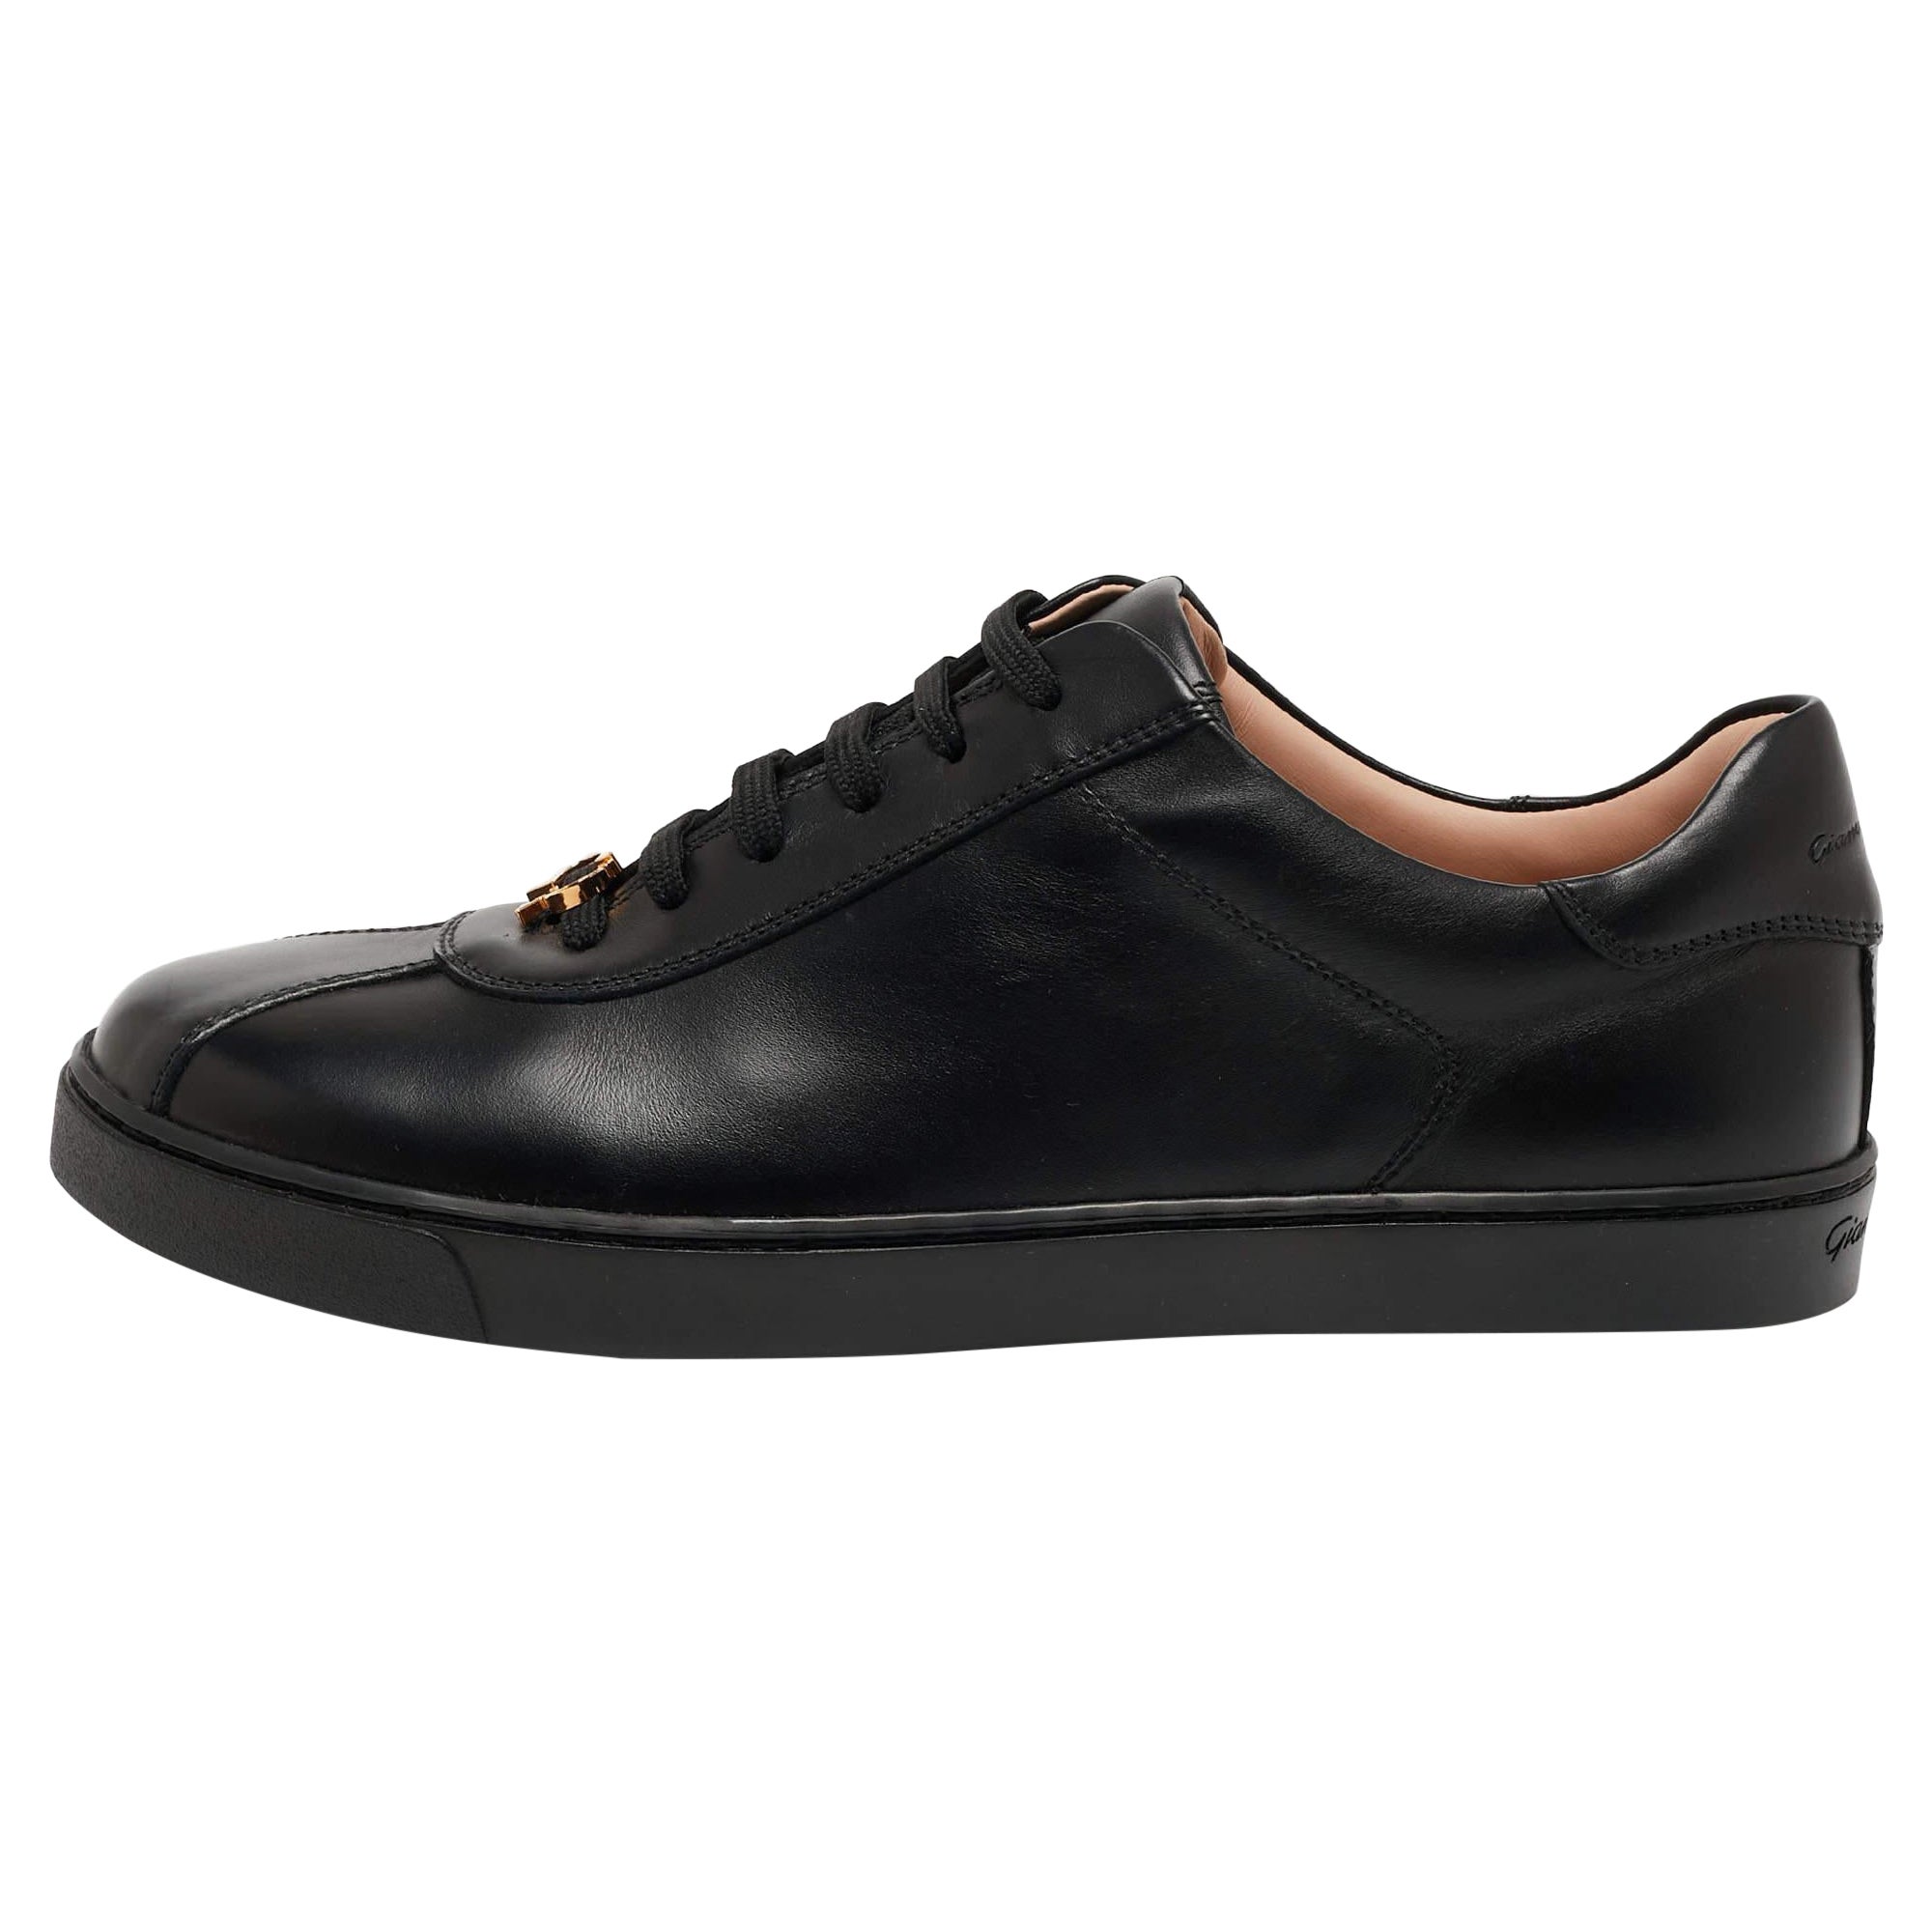 Gianvito Rossi Black Leather Low Top Sneakers Size 39 For Sale